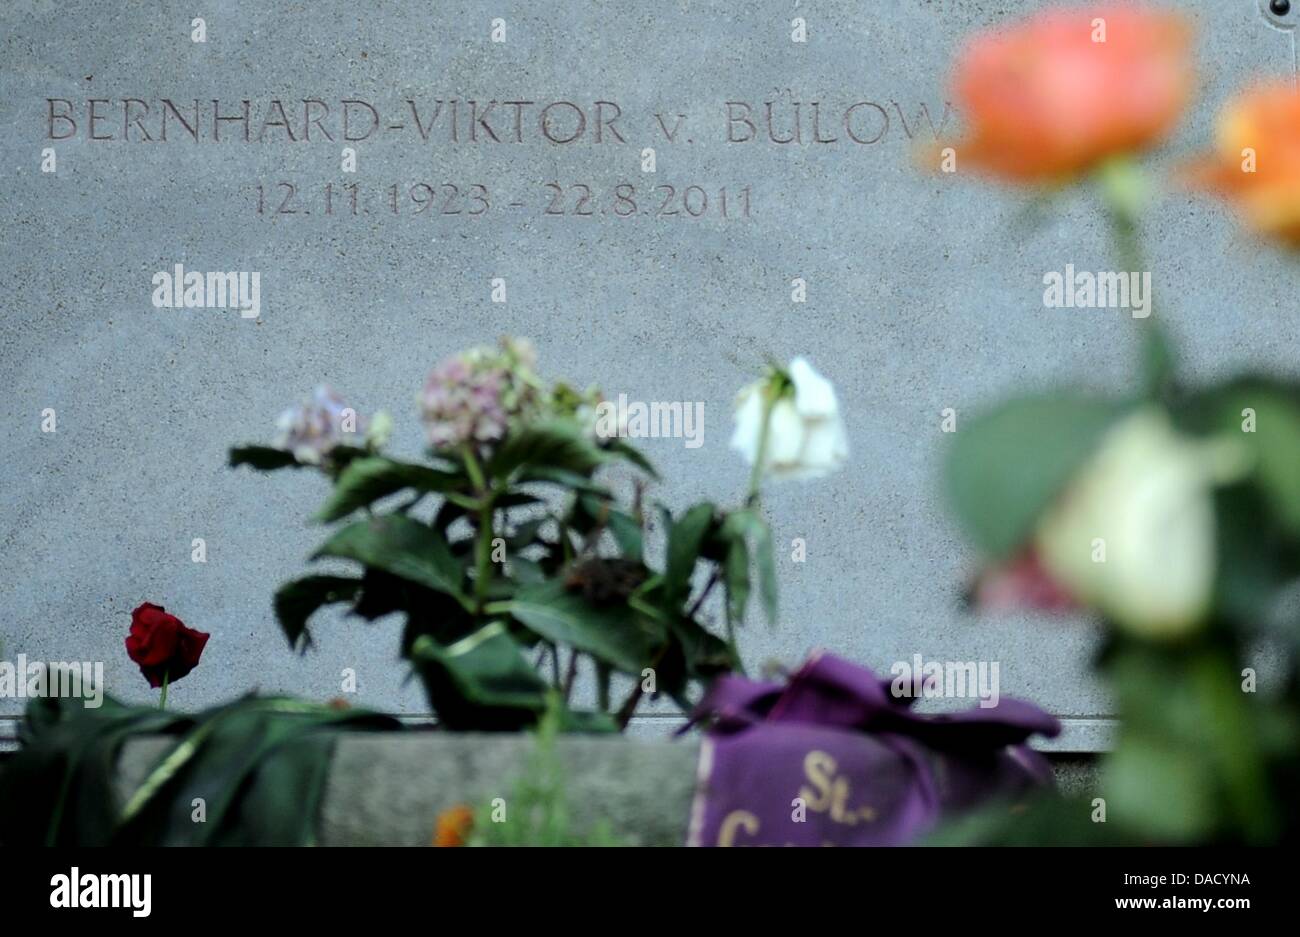 The gravestone of Loriot is pictured at the forest cemetery heerstrasse in Berlin, Germany, 16 NOvember 2011. The lettering on the gravestone of comedian, humorist, cartoonist, film director, actor and writer simply states: 'Bernhard-Viktor von Buelow 12.11.1923 - 22.8.2011'. Photo: Britta Pedersen Stock Photo